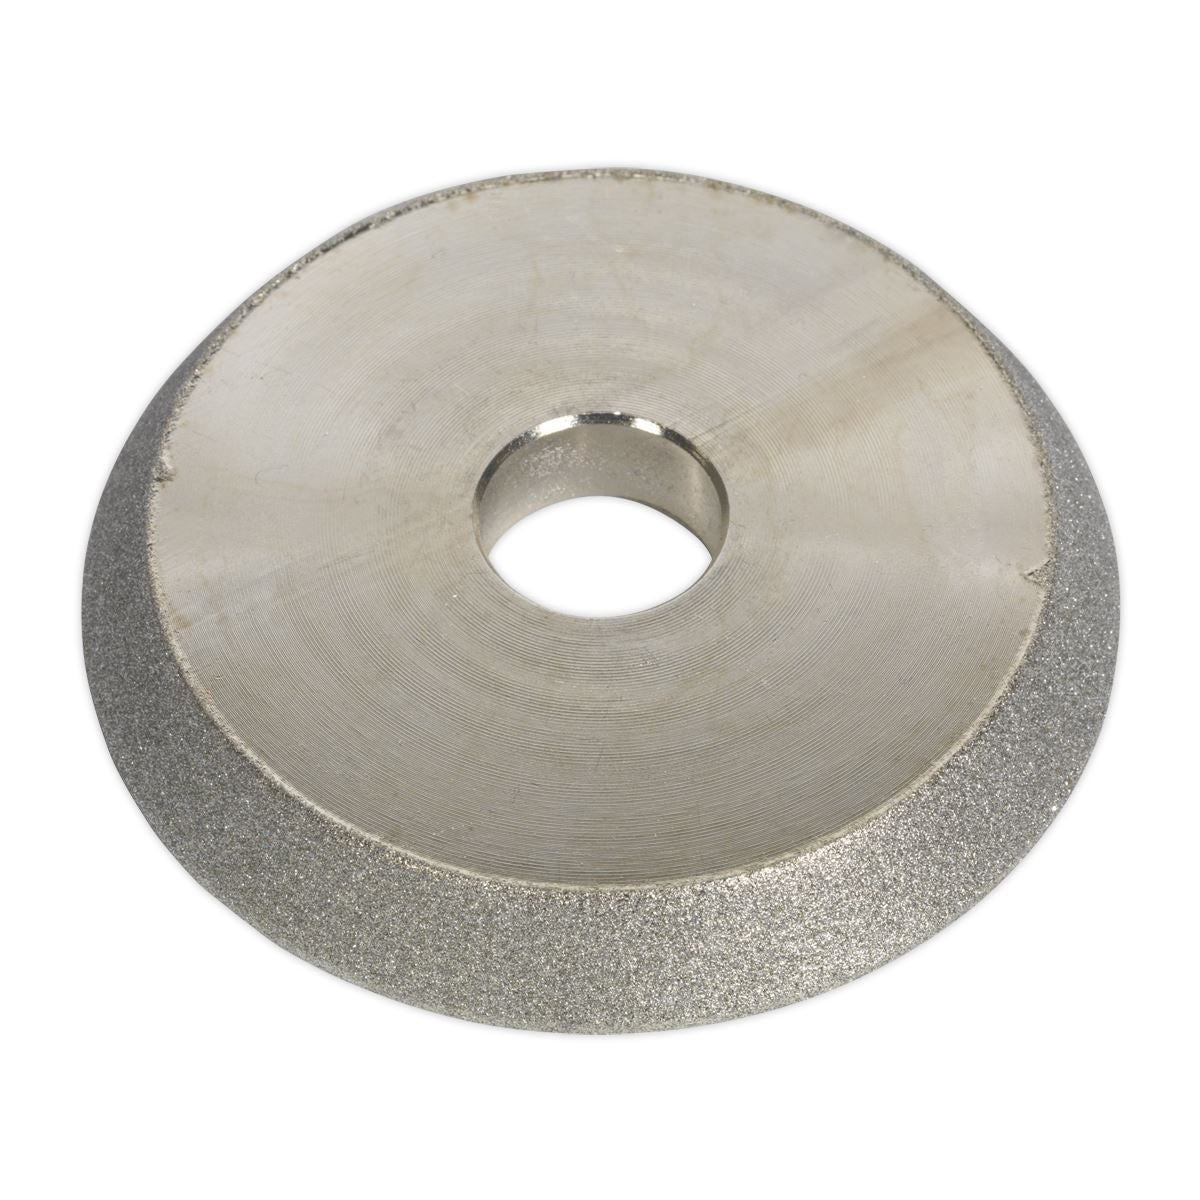 Sealey Grinding Wheel for SMS2008